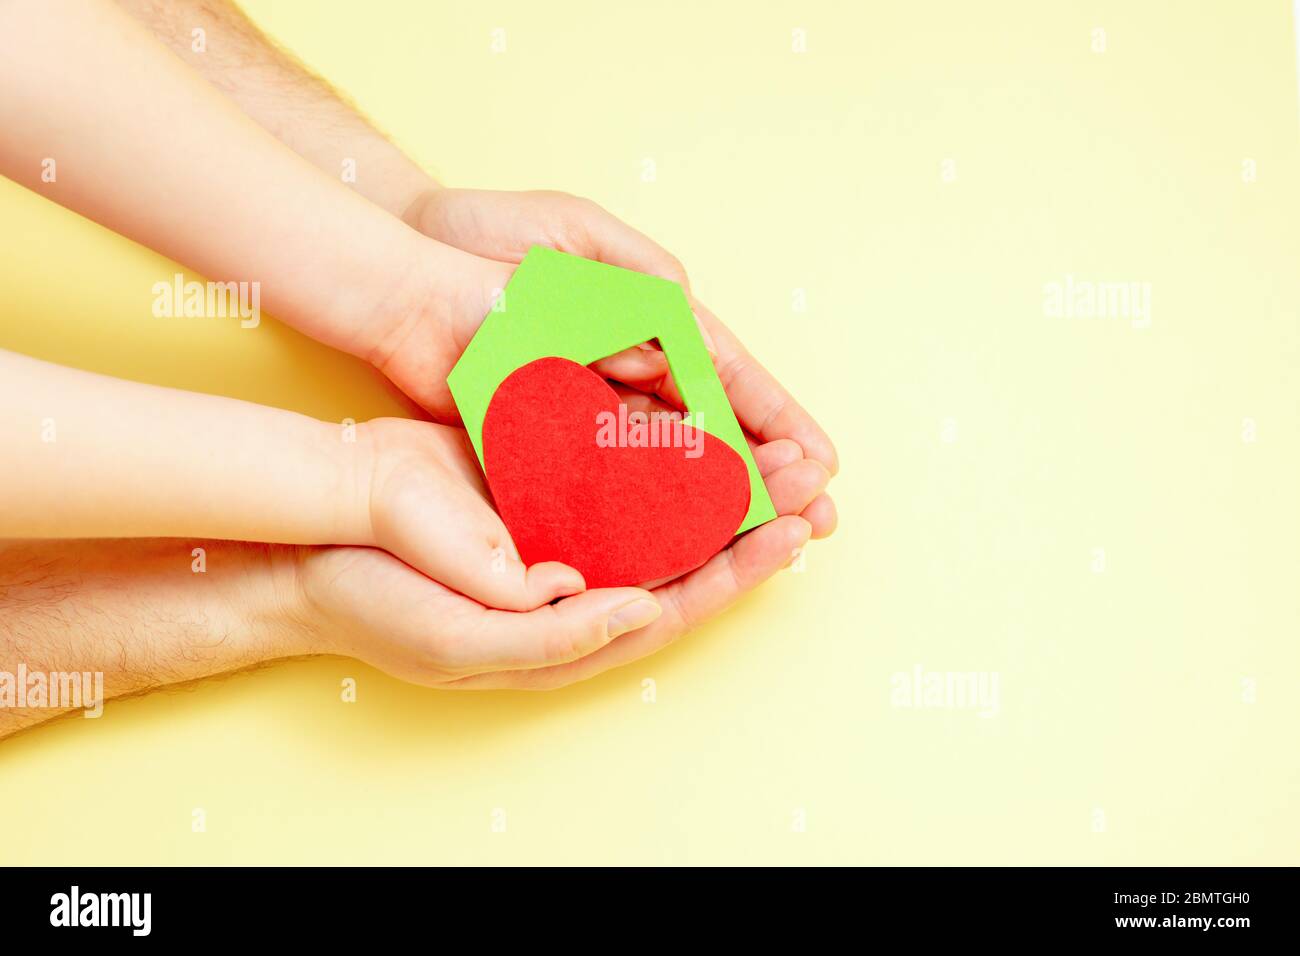 Paper green house with red heart in dad and child's hands on yellow background. Charity concept. Stock Photo